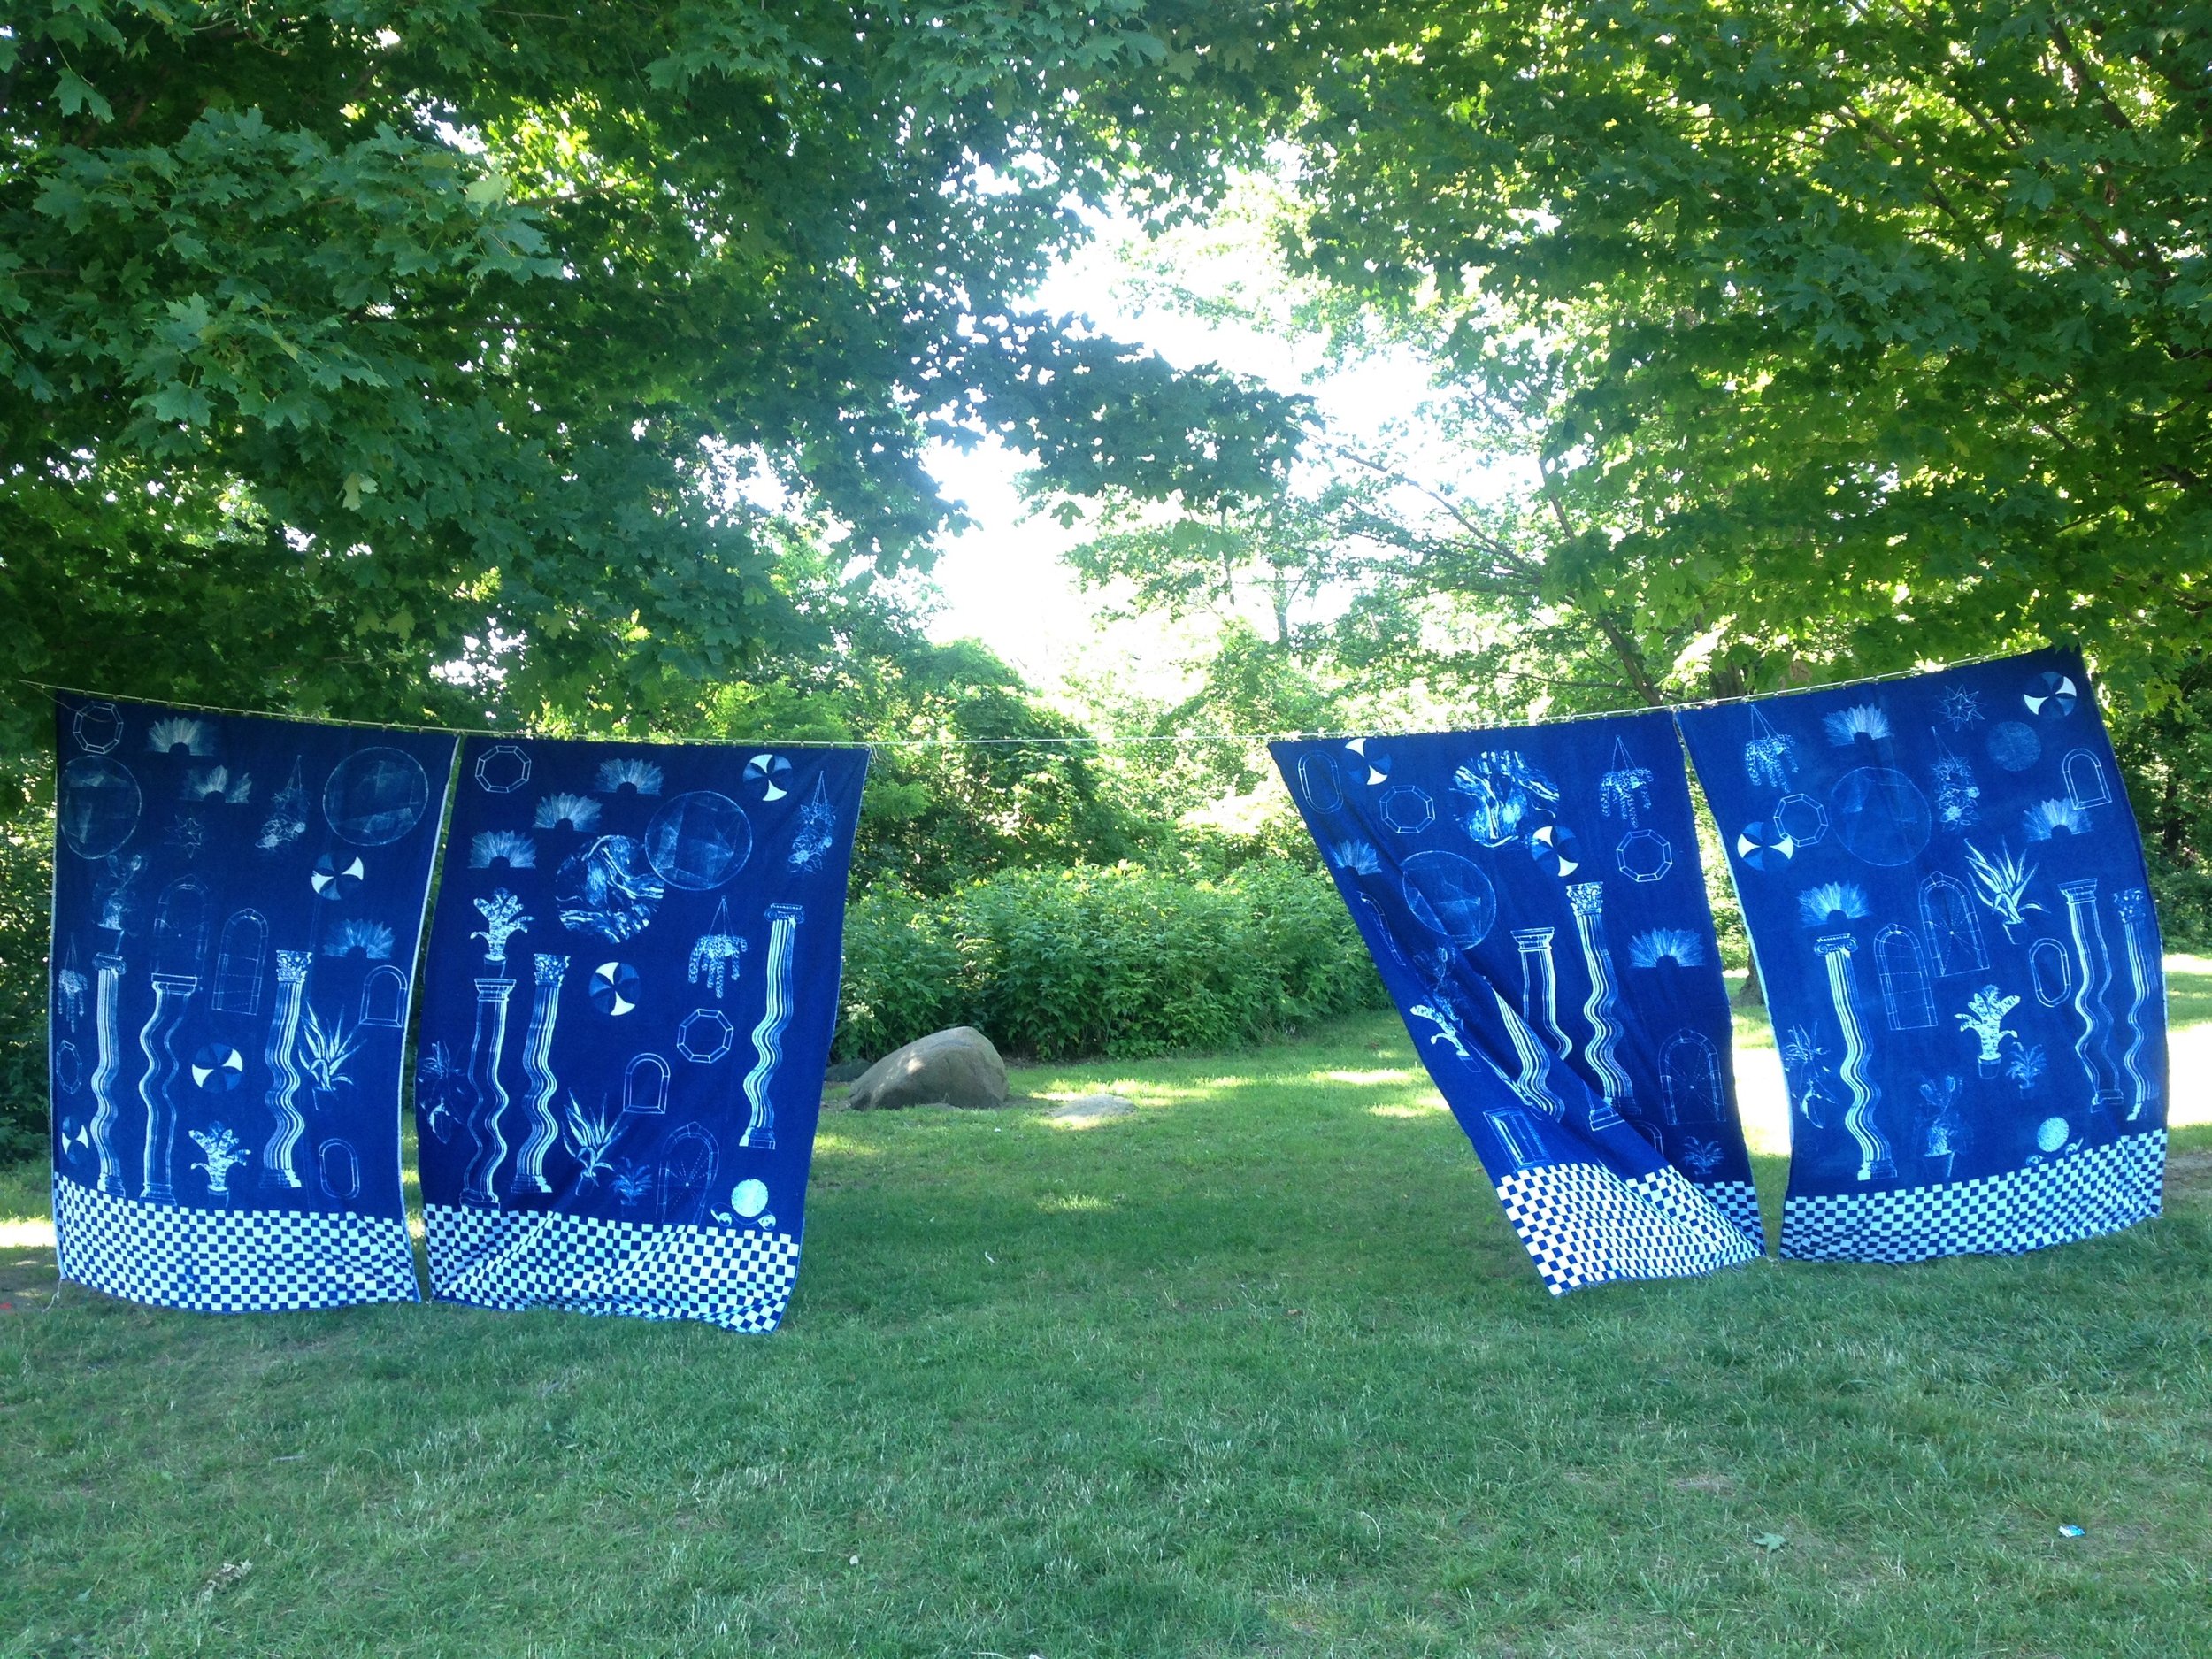  a place halfway between both worlds where anything can happen and there is no problem with time  Cyanotype sun printed curtains, each 5' x 7'  Feast in the East, Praire Drive park, Scarborough&nbsp;  2017 